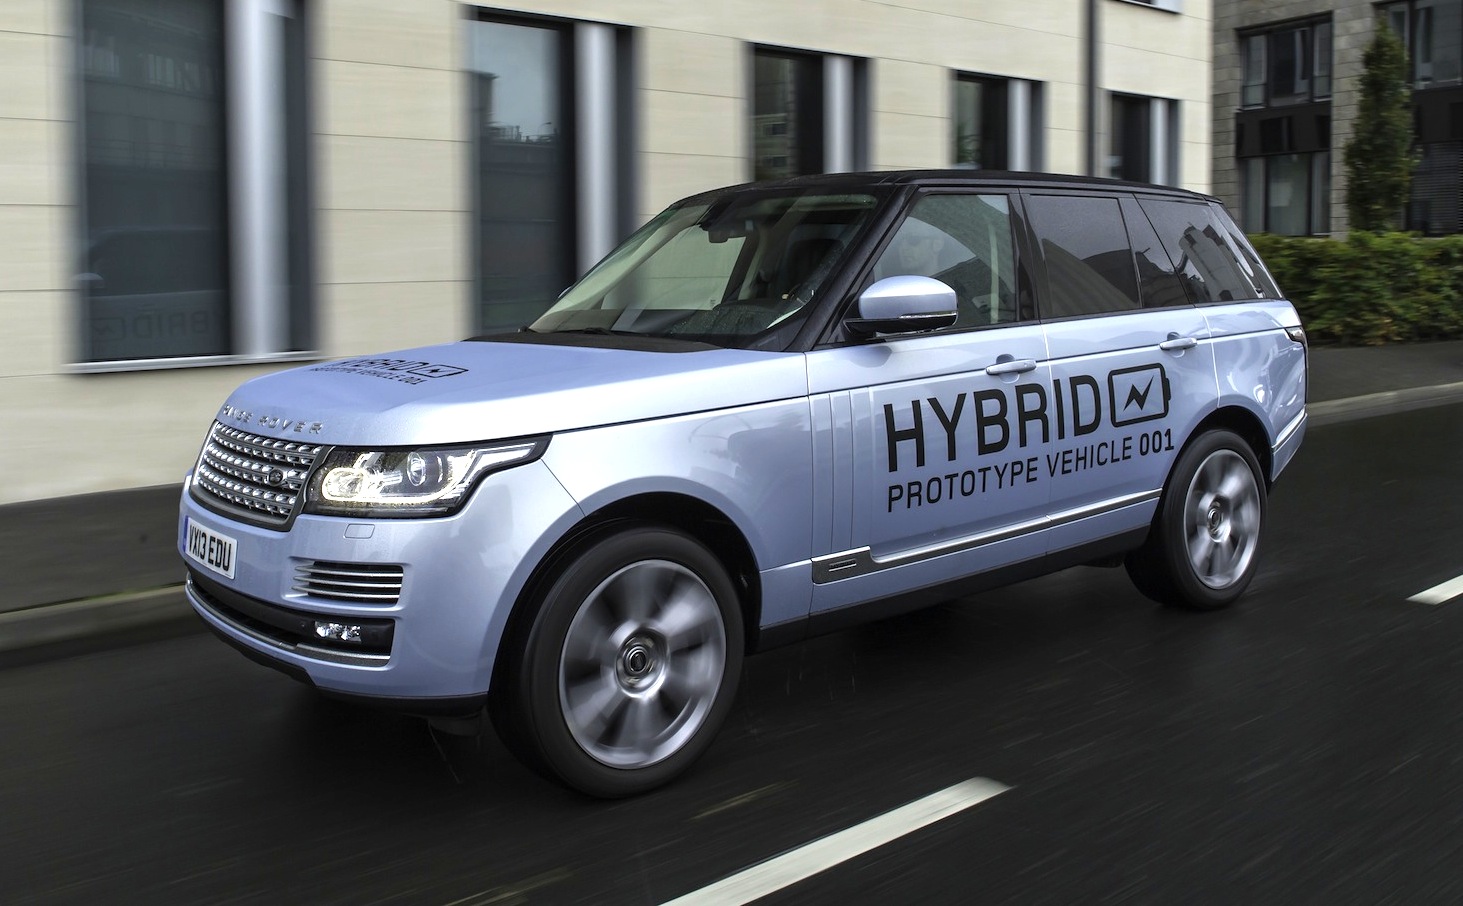 2015 Land Rover Range Rover Hybrid Pics, Vehicles Collection